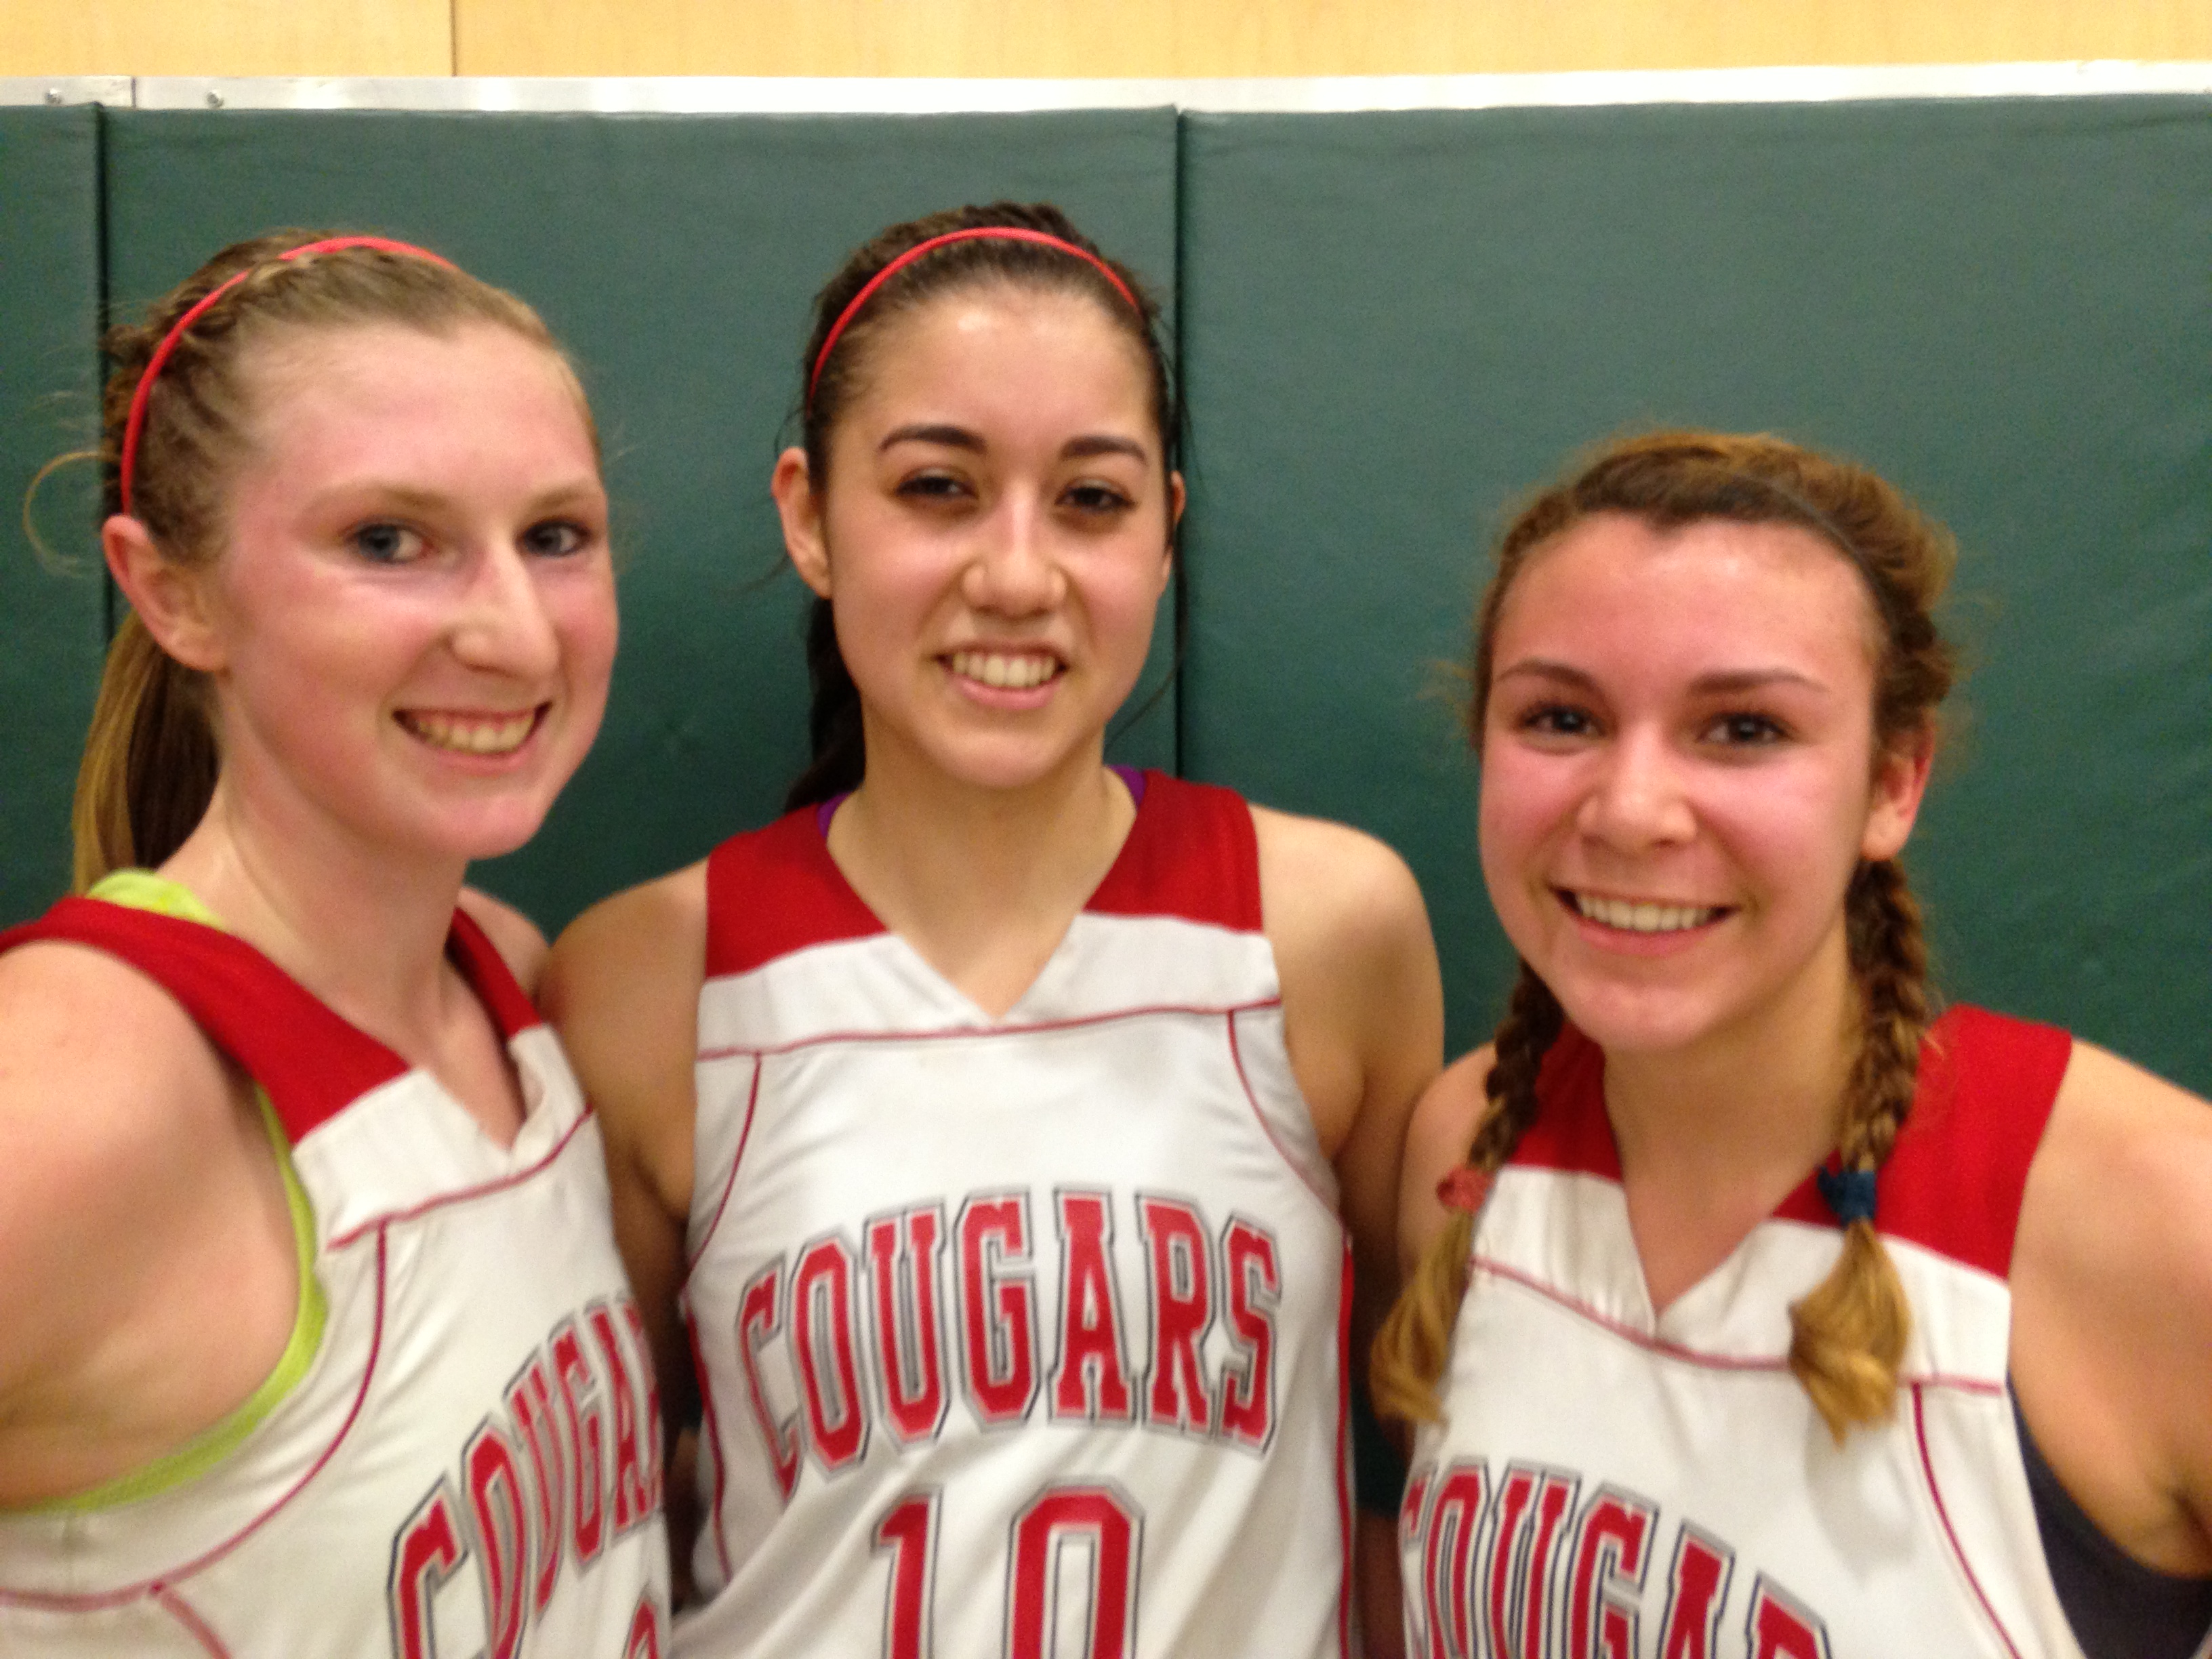 Leading Carondelet of Concord to the unofficial NorCal Division II title on Saturday were Mackenzie Cast, Lauren Nicolosi and Natalie Romeo. The Cougars play Stockton St. Mary's on Tuesday. Photo: Harold Abend.